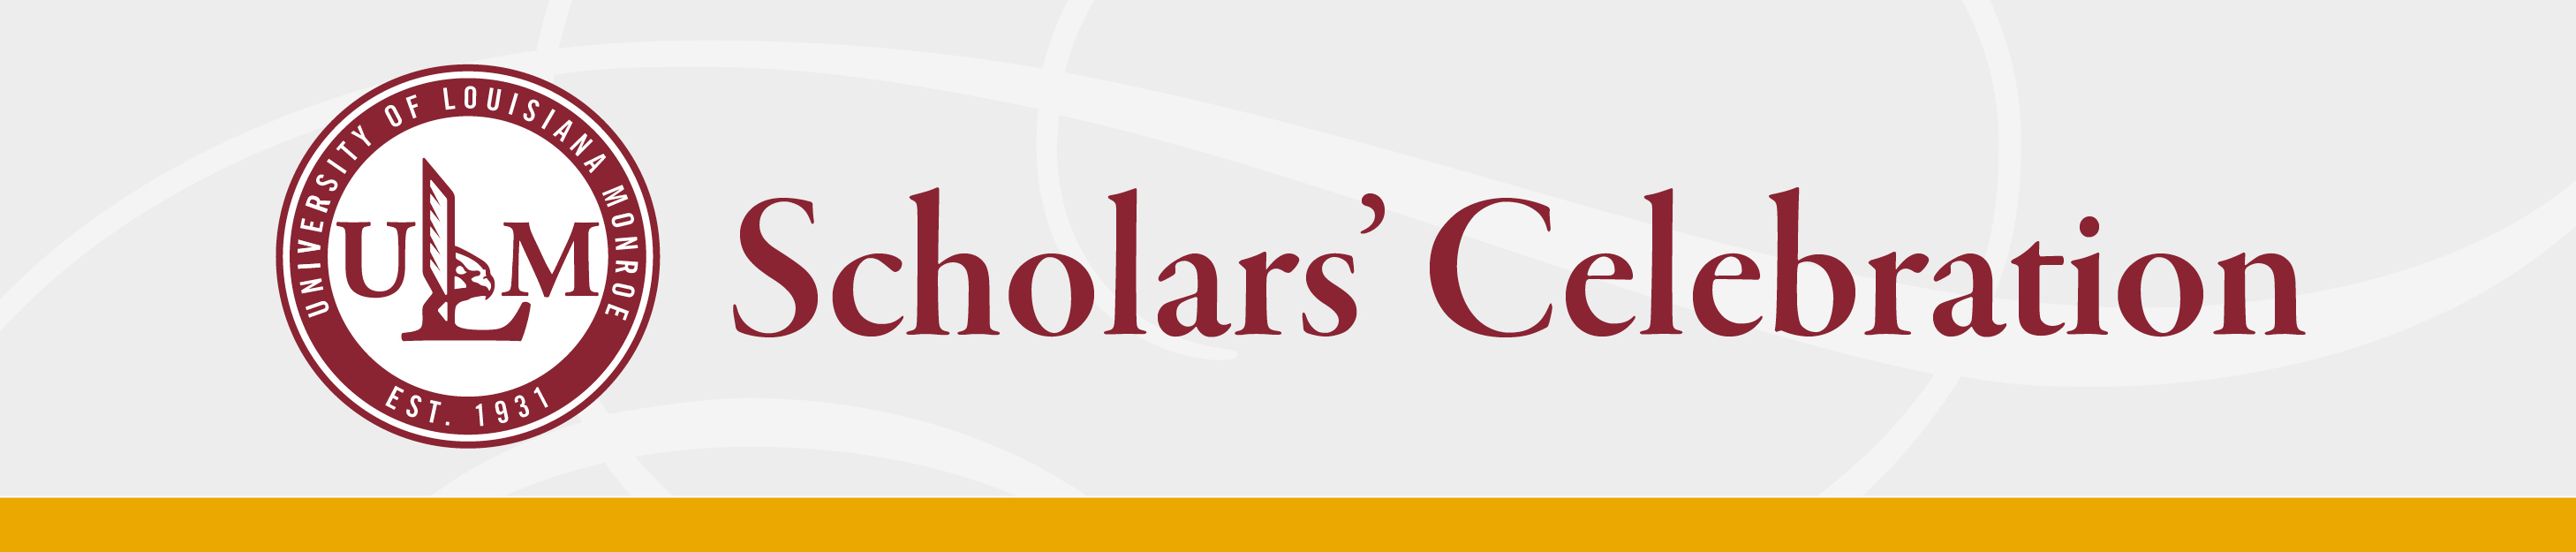 ULM logo with text "Scholars' Celebration" to the right